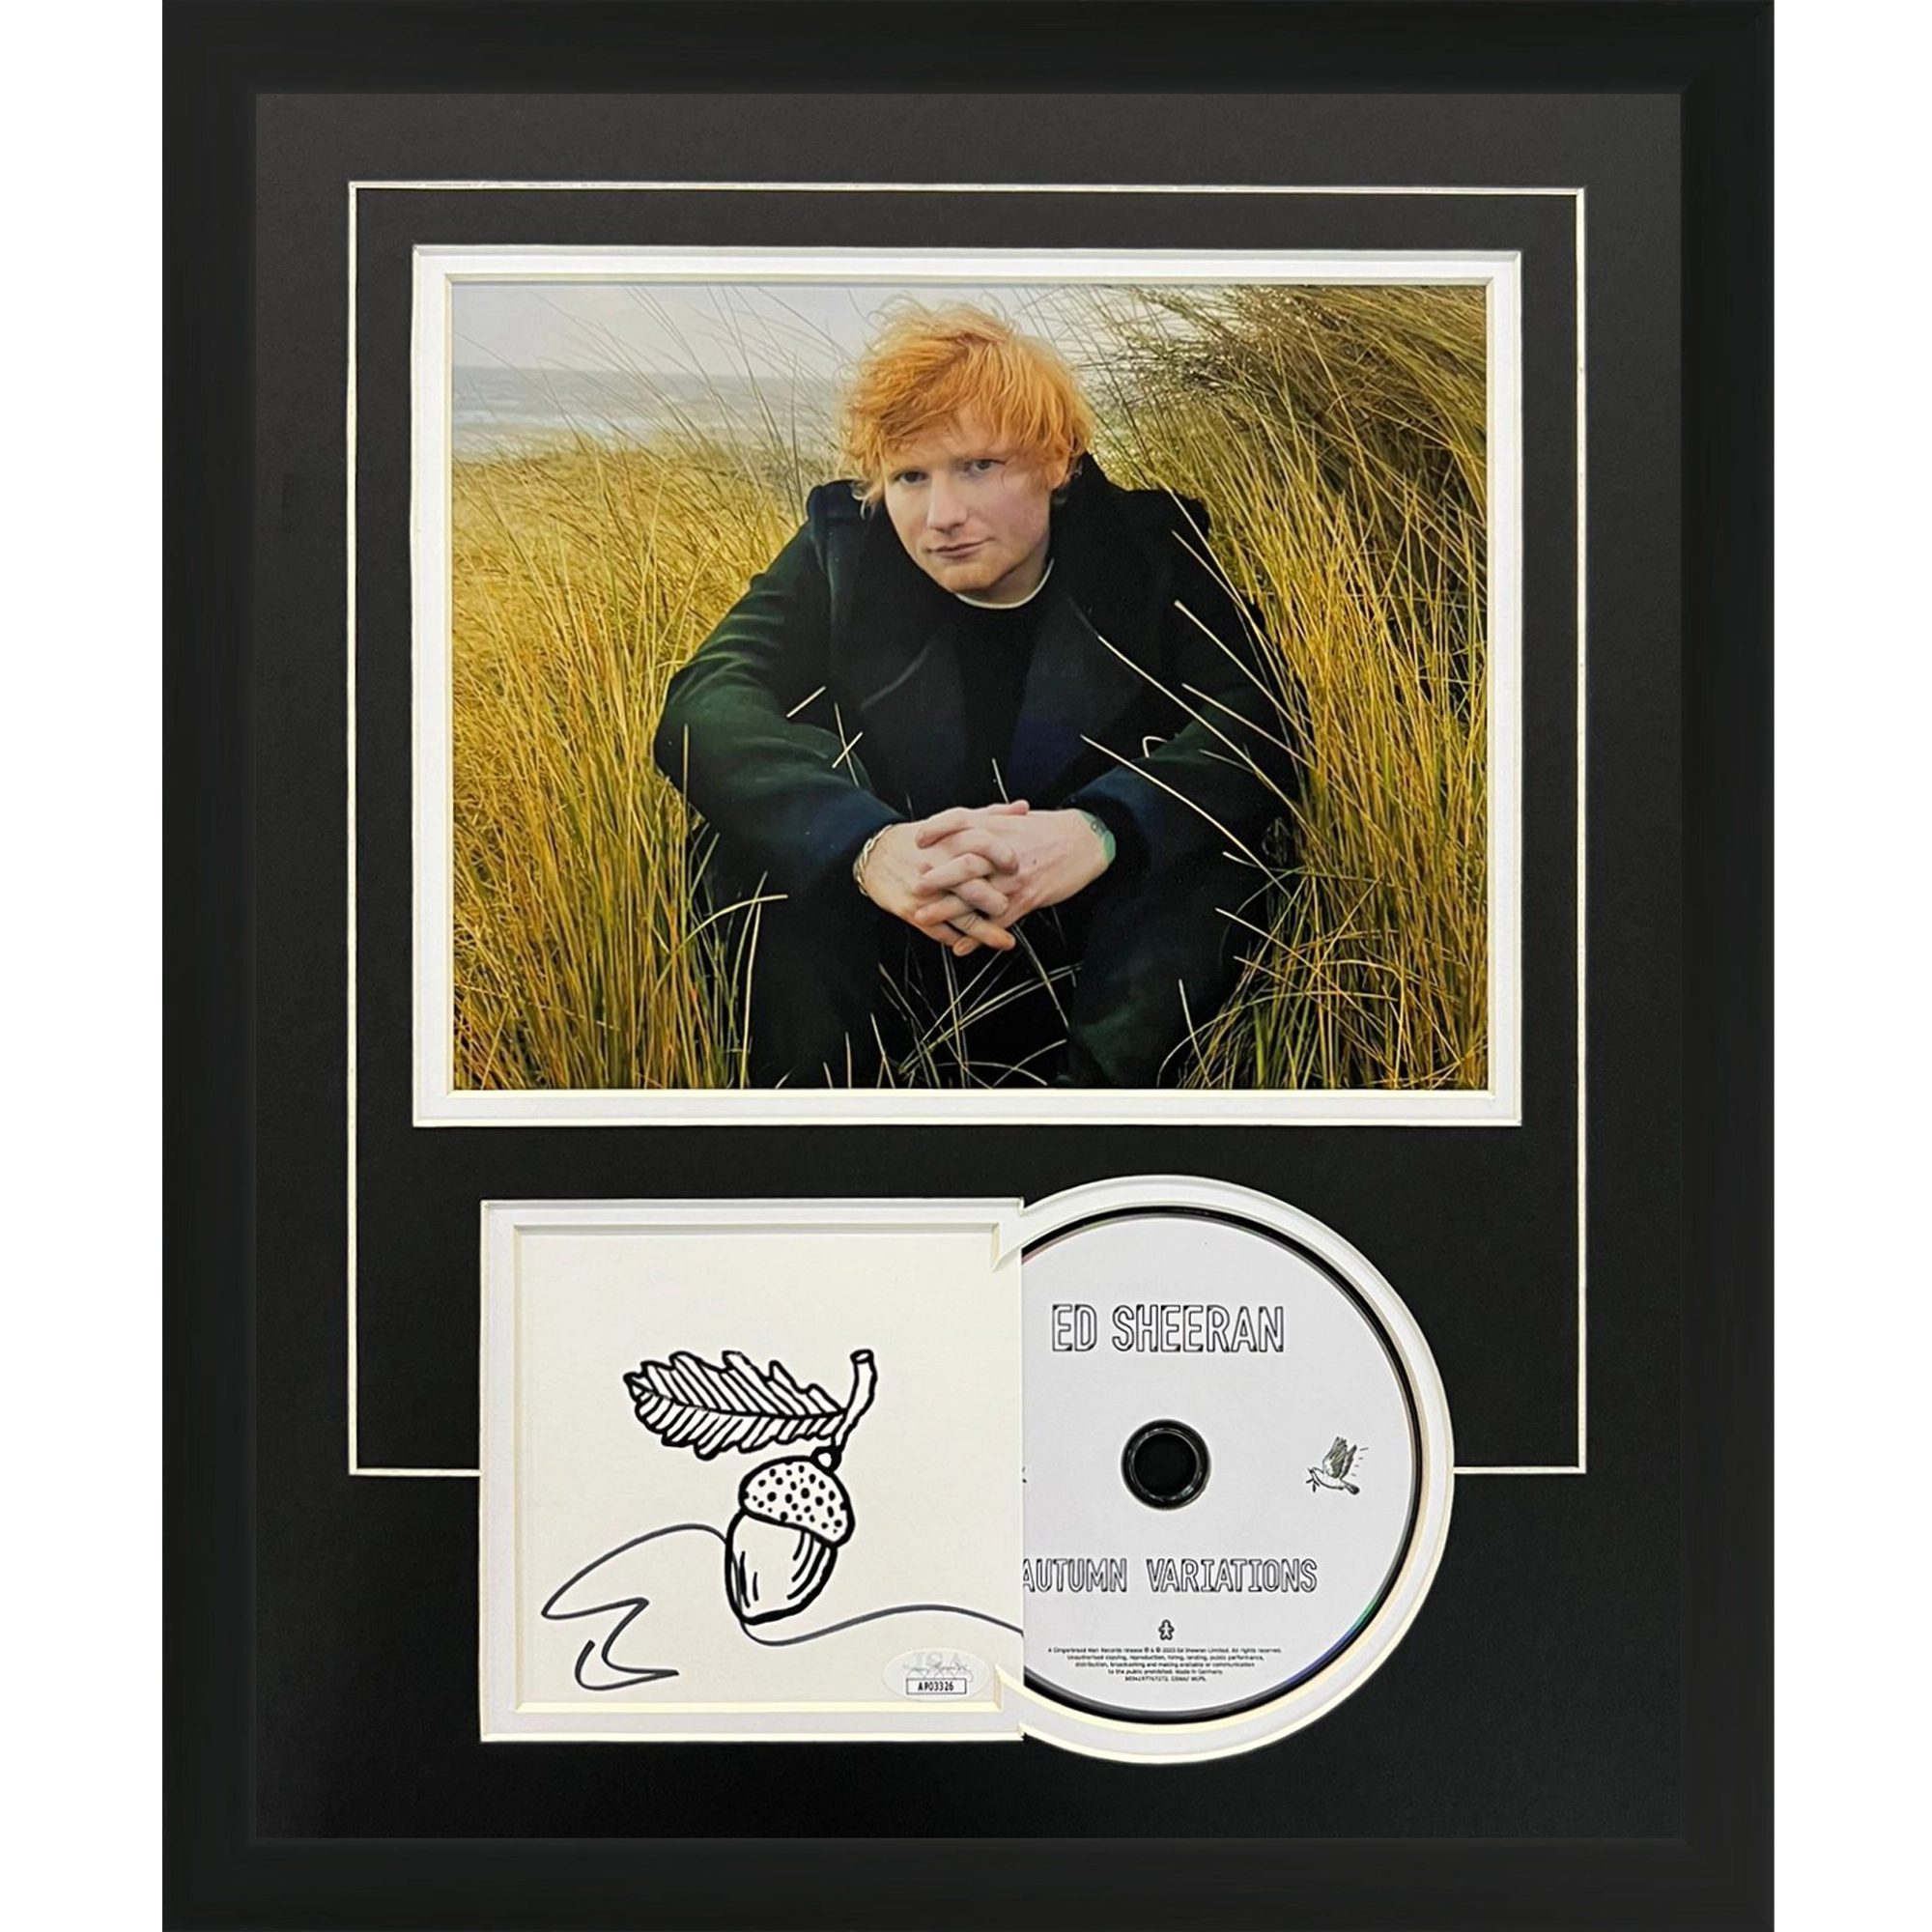 Ed Sheeran Autographed Autumn Variations Deluxe Framed CD and Cover - JSA